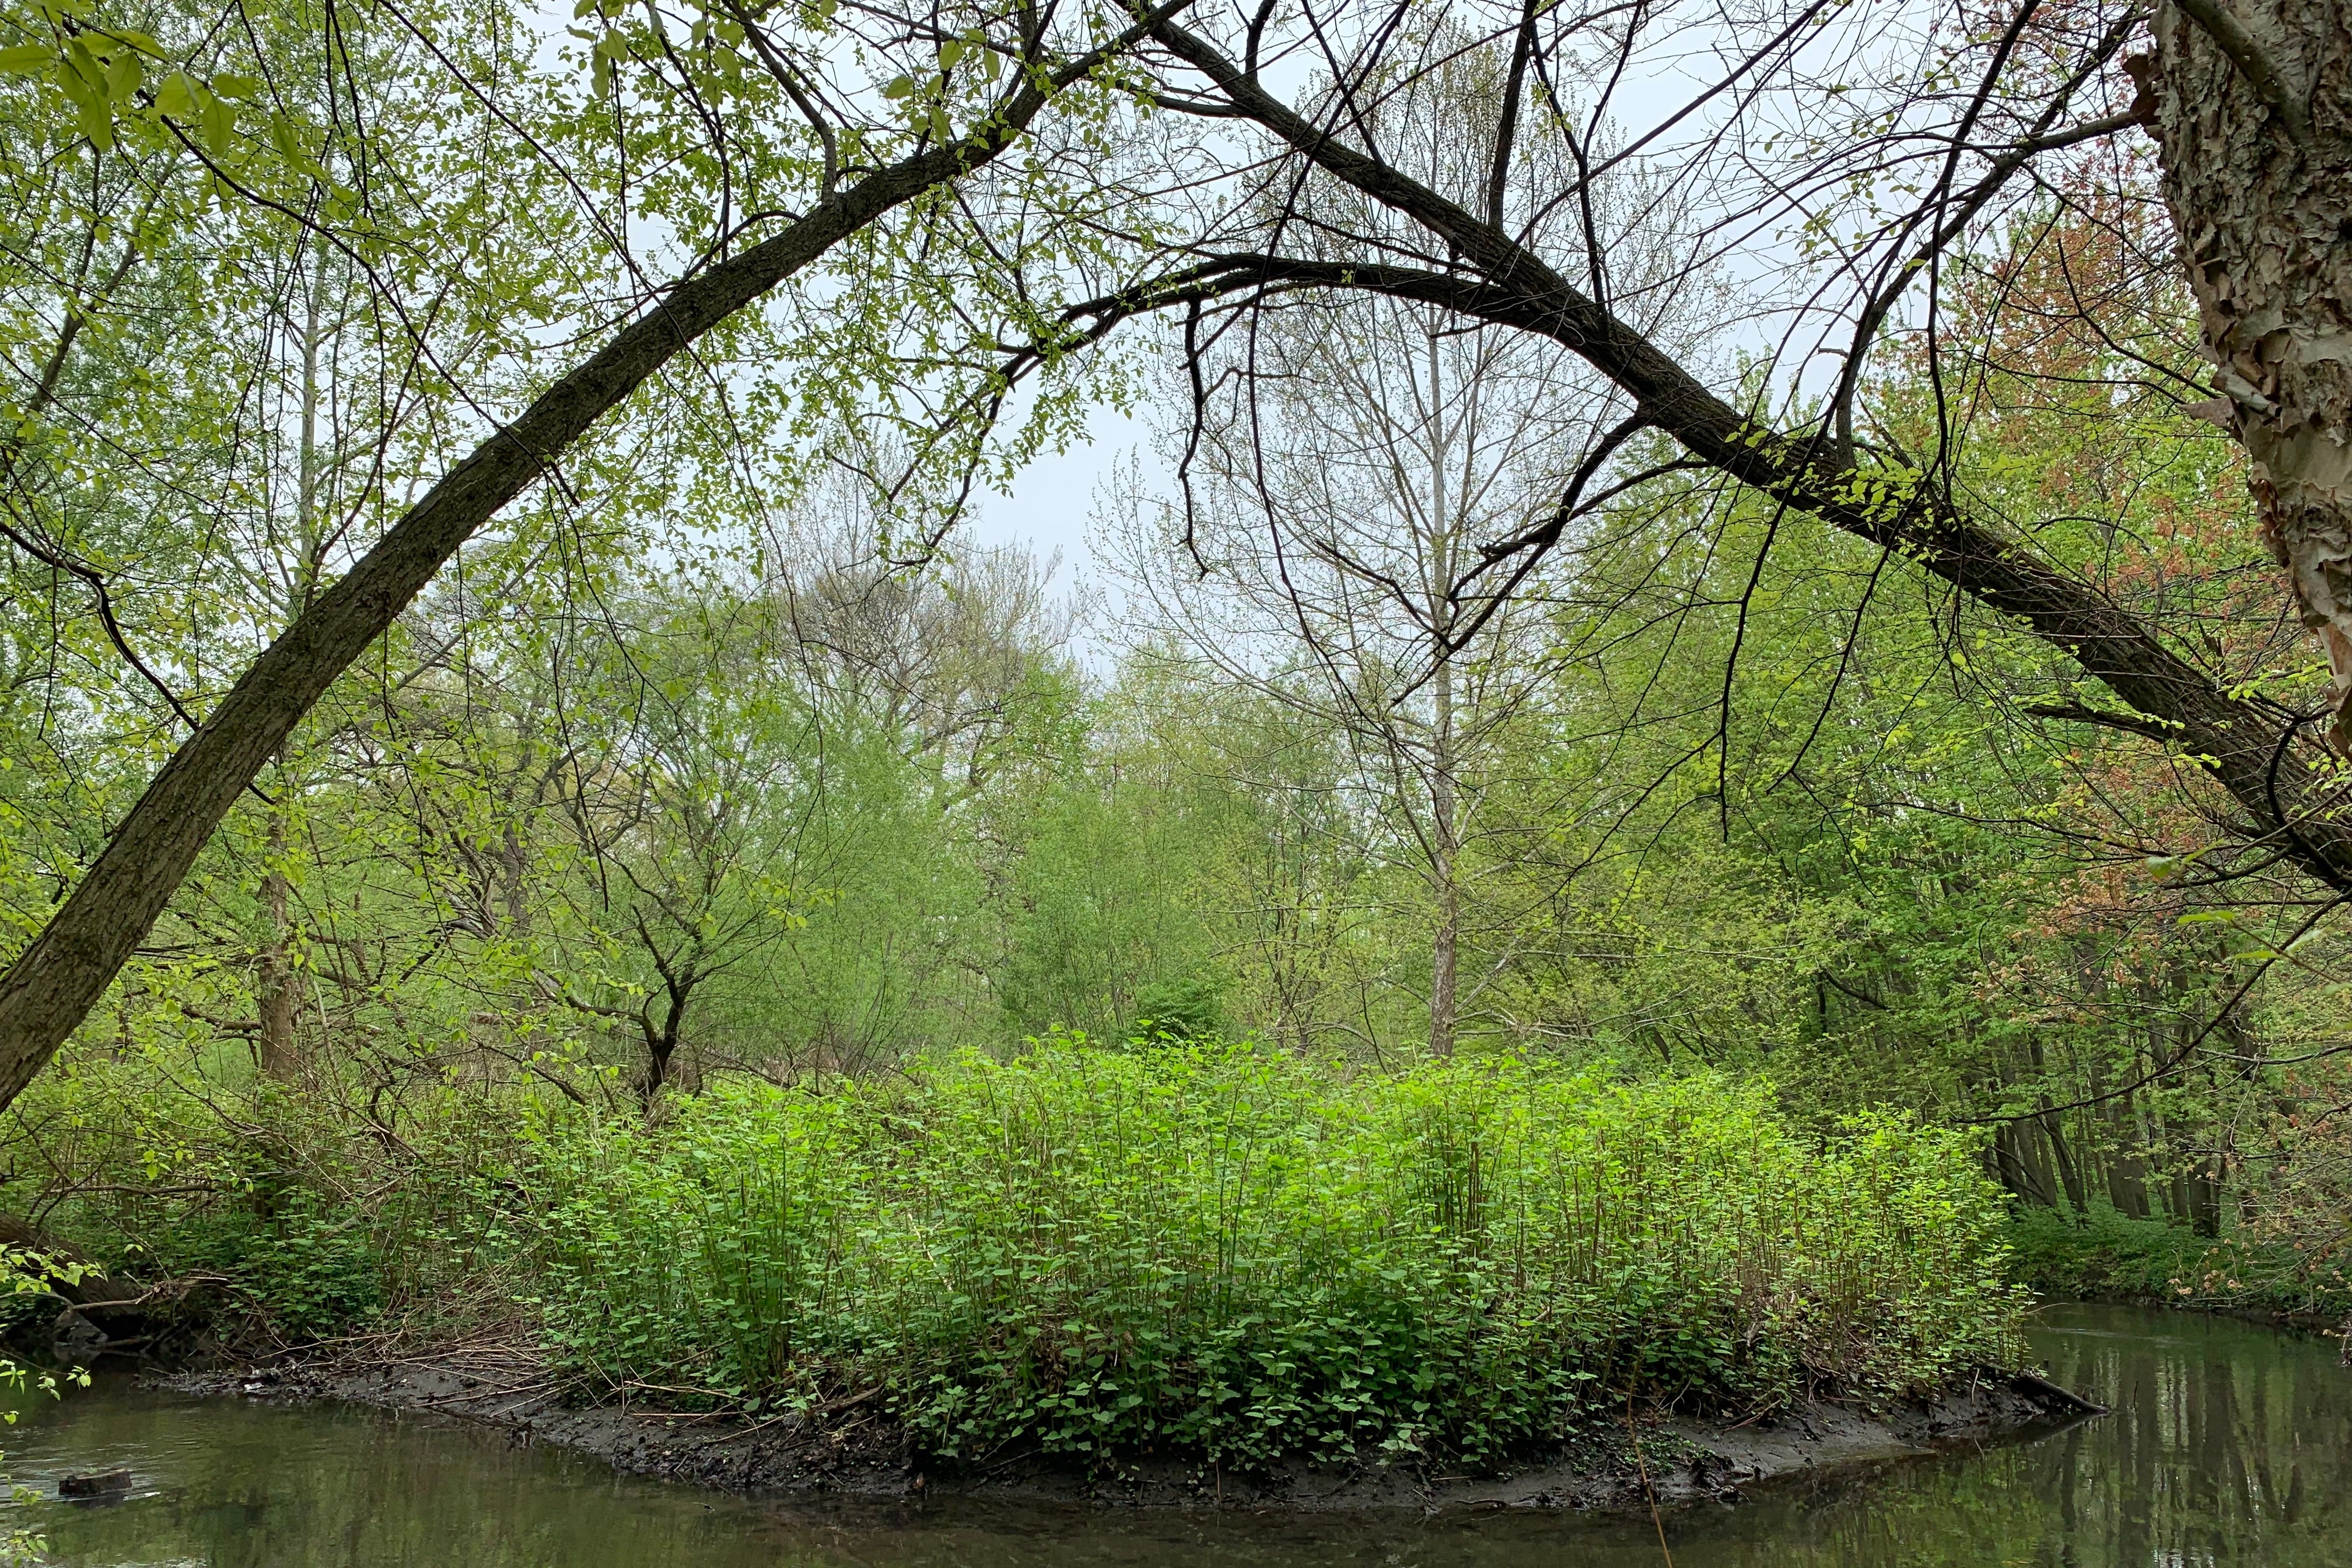 A knotweed infestation in the Bronx, where the riverbanks slough into the stream.